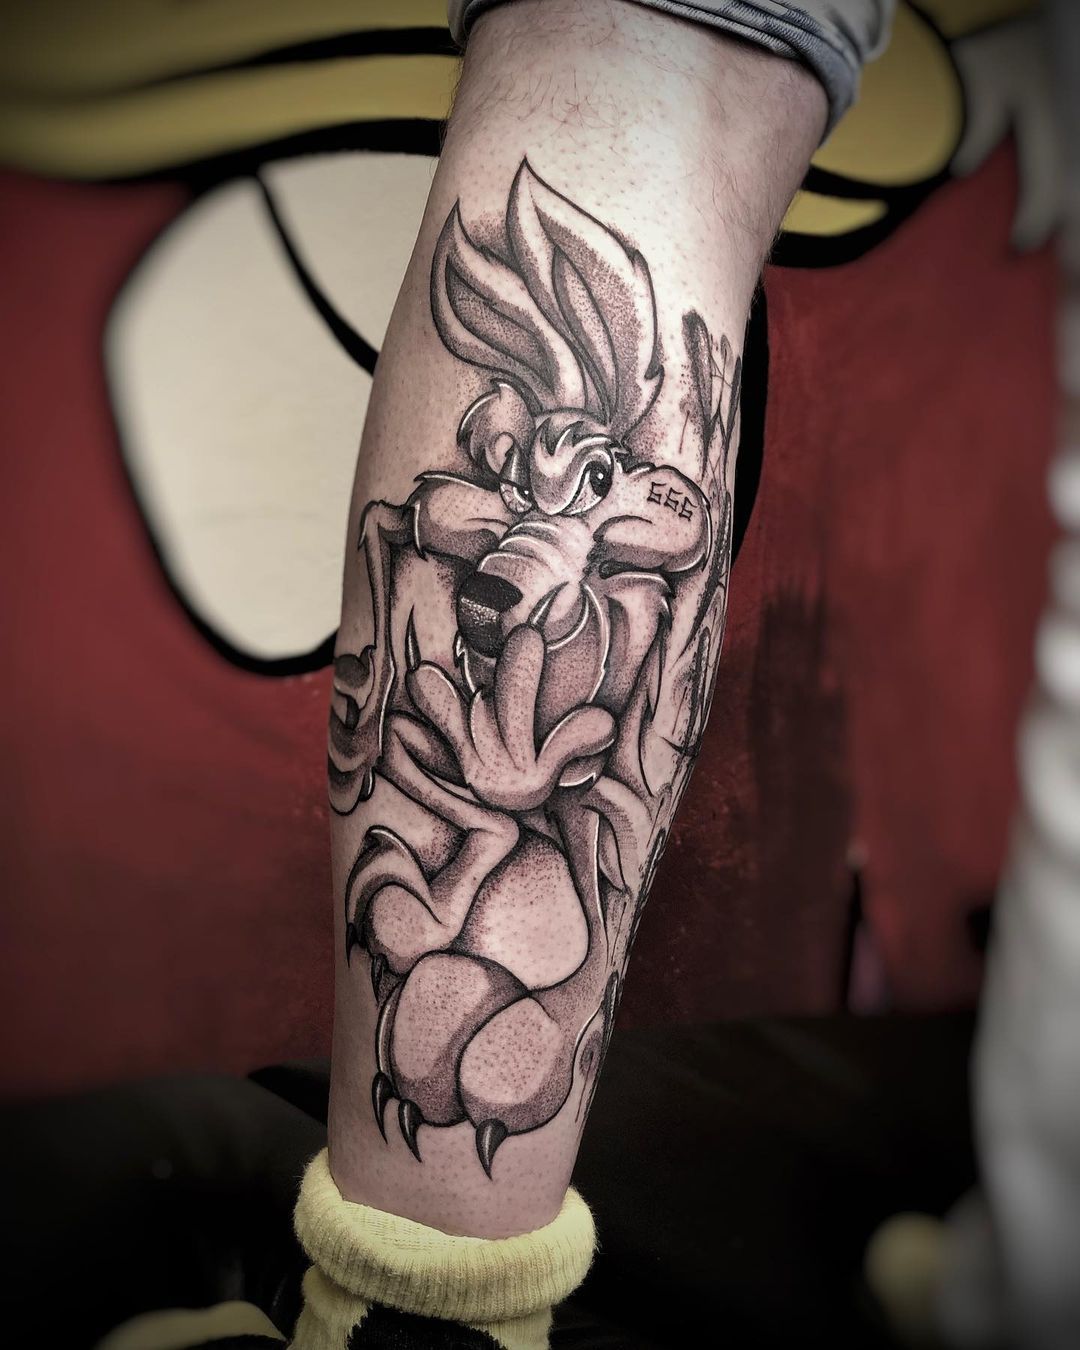 houseofinktattoo on Instagram looneytunes Wile E Coyote and Roadrunner  tattoo with a great story behind it by seanheirigs mraff21  roadrunnertattoo loonytunestattoo